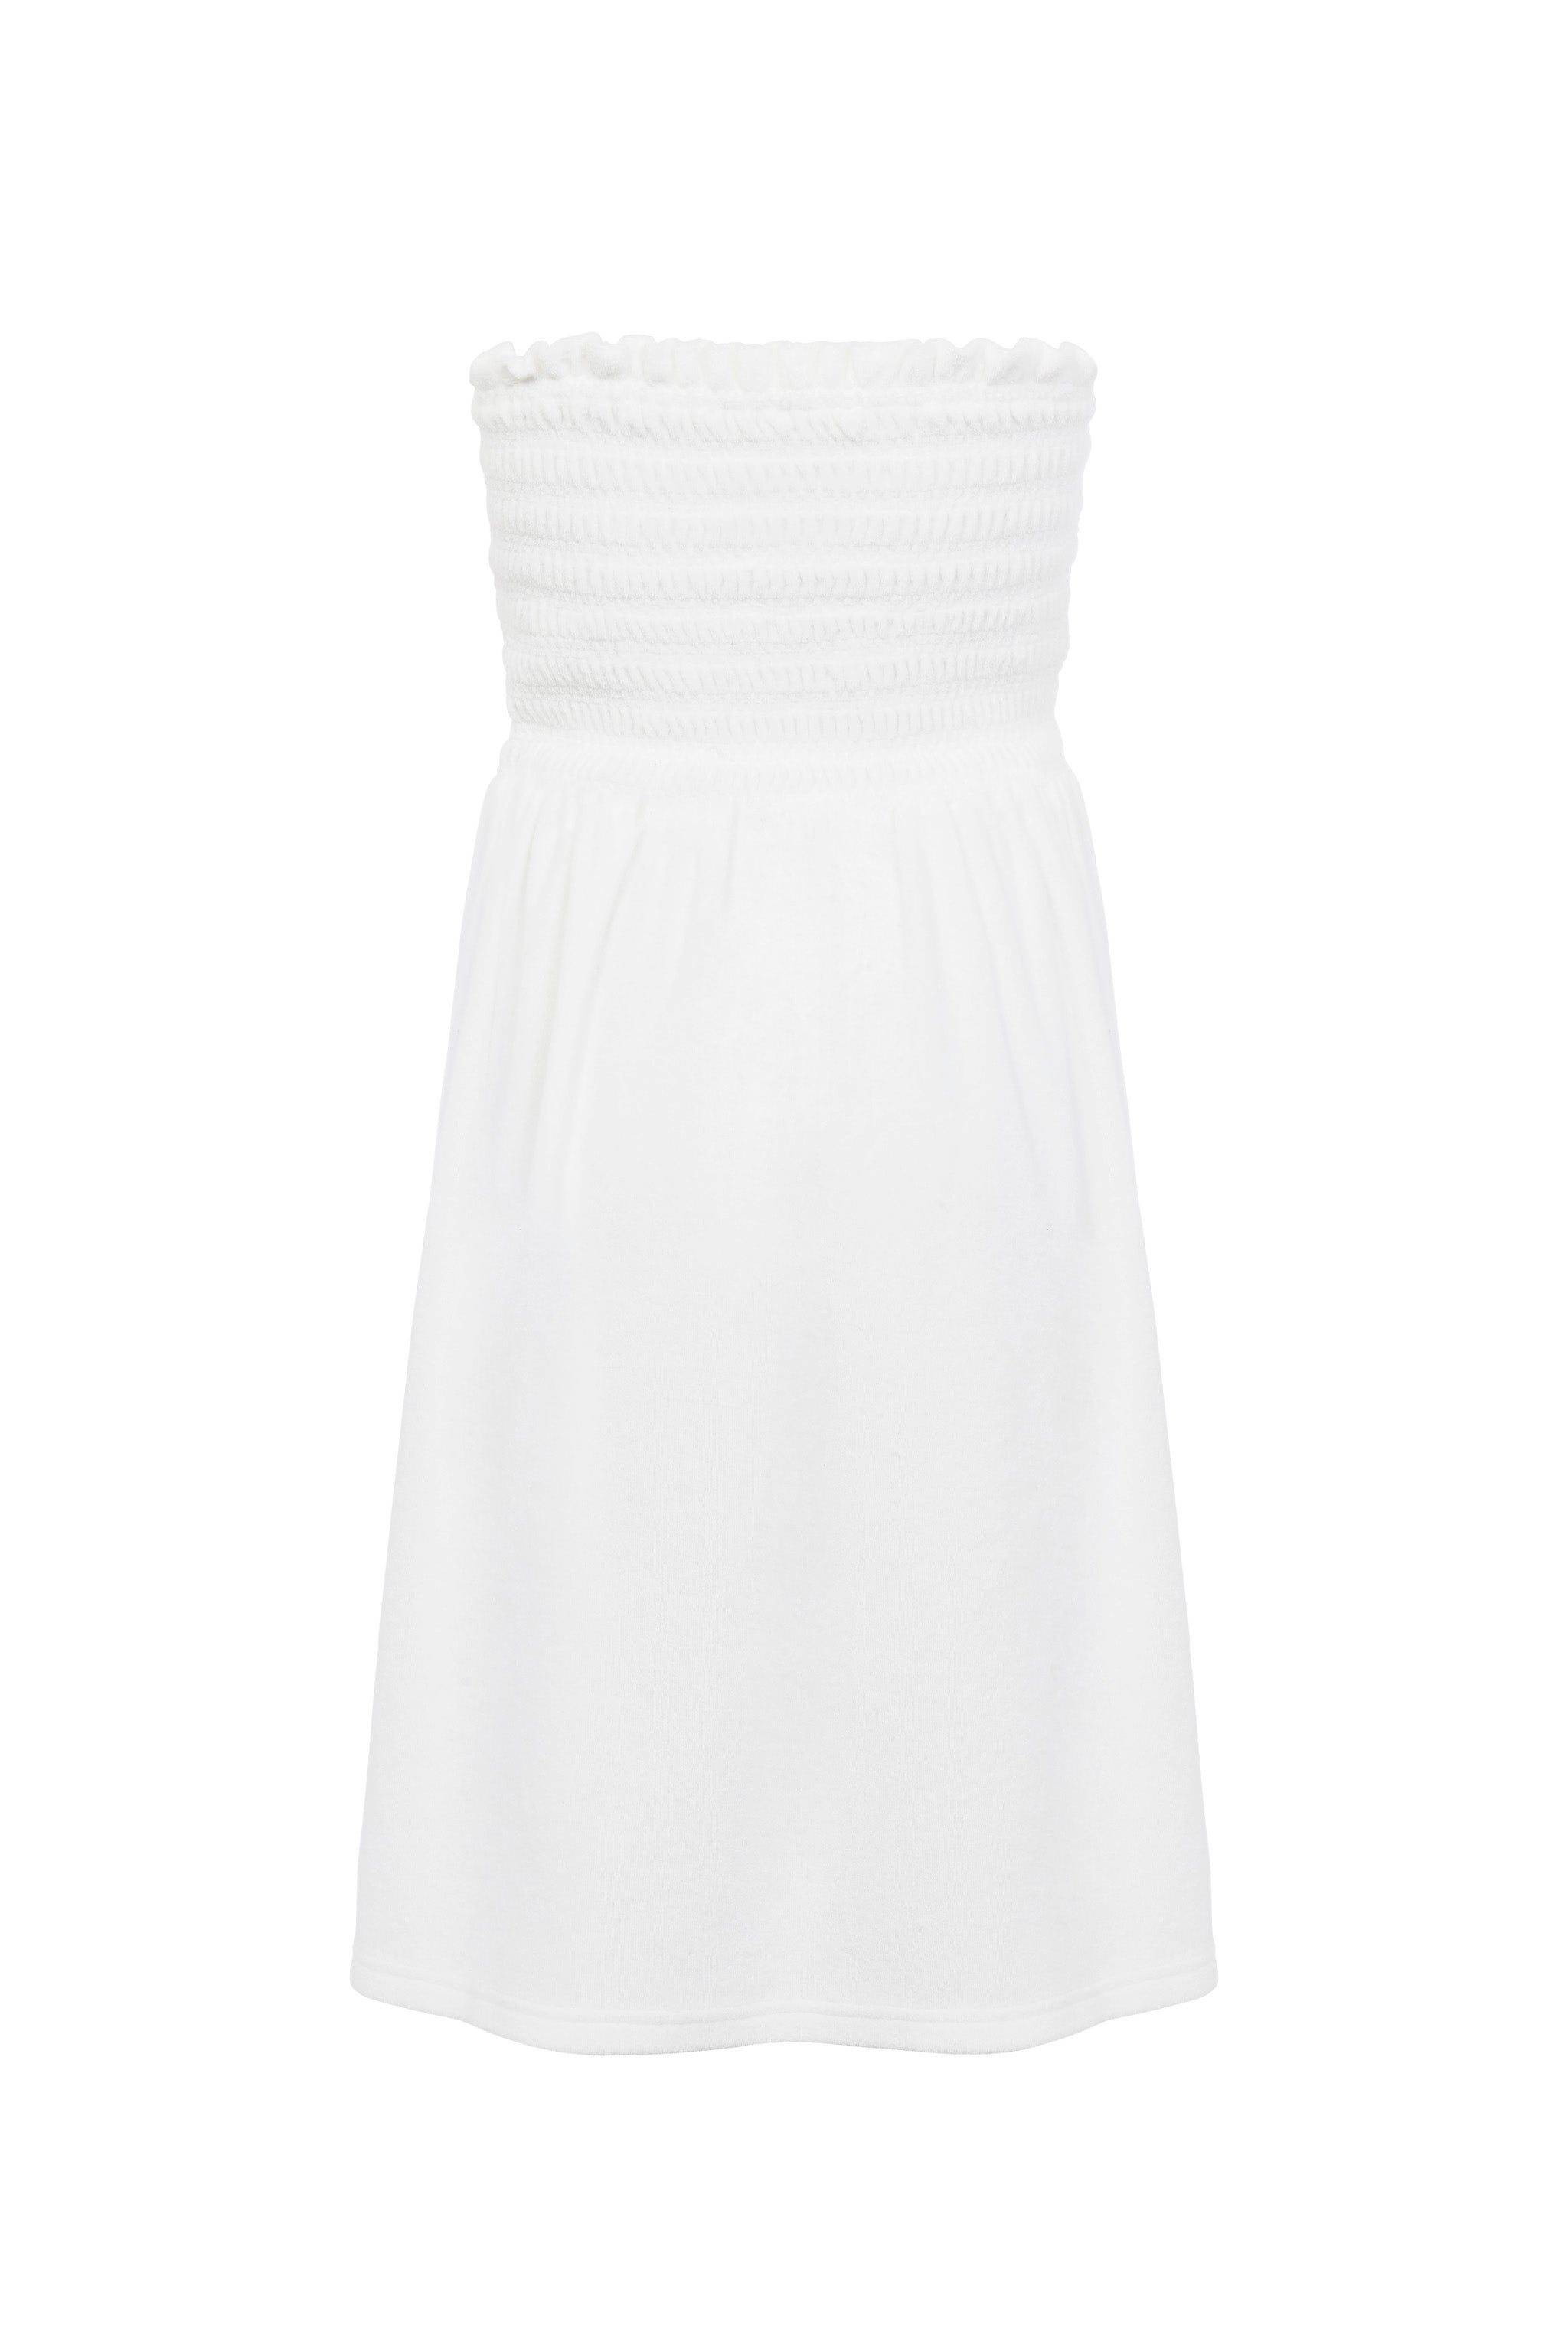 Towelling Dress (White)